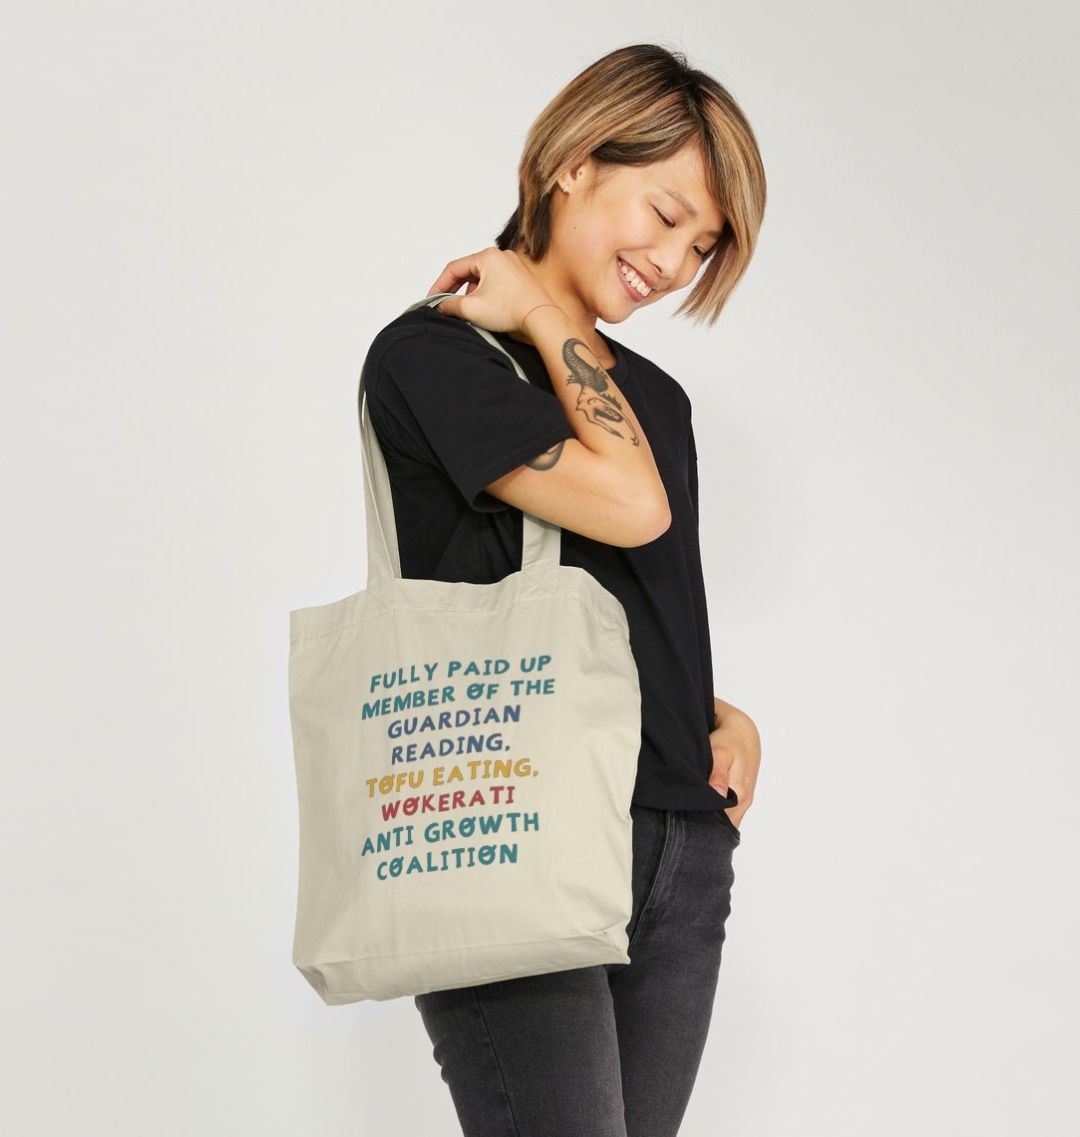 Eco Bag Lady Says - North Fork Valley Creative Coalition